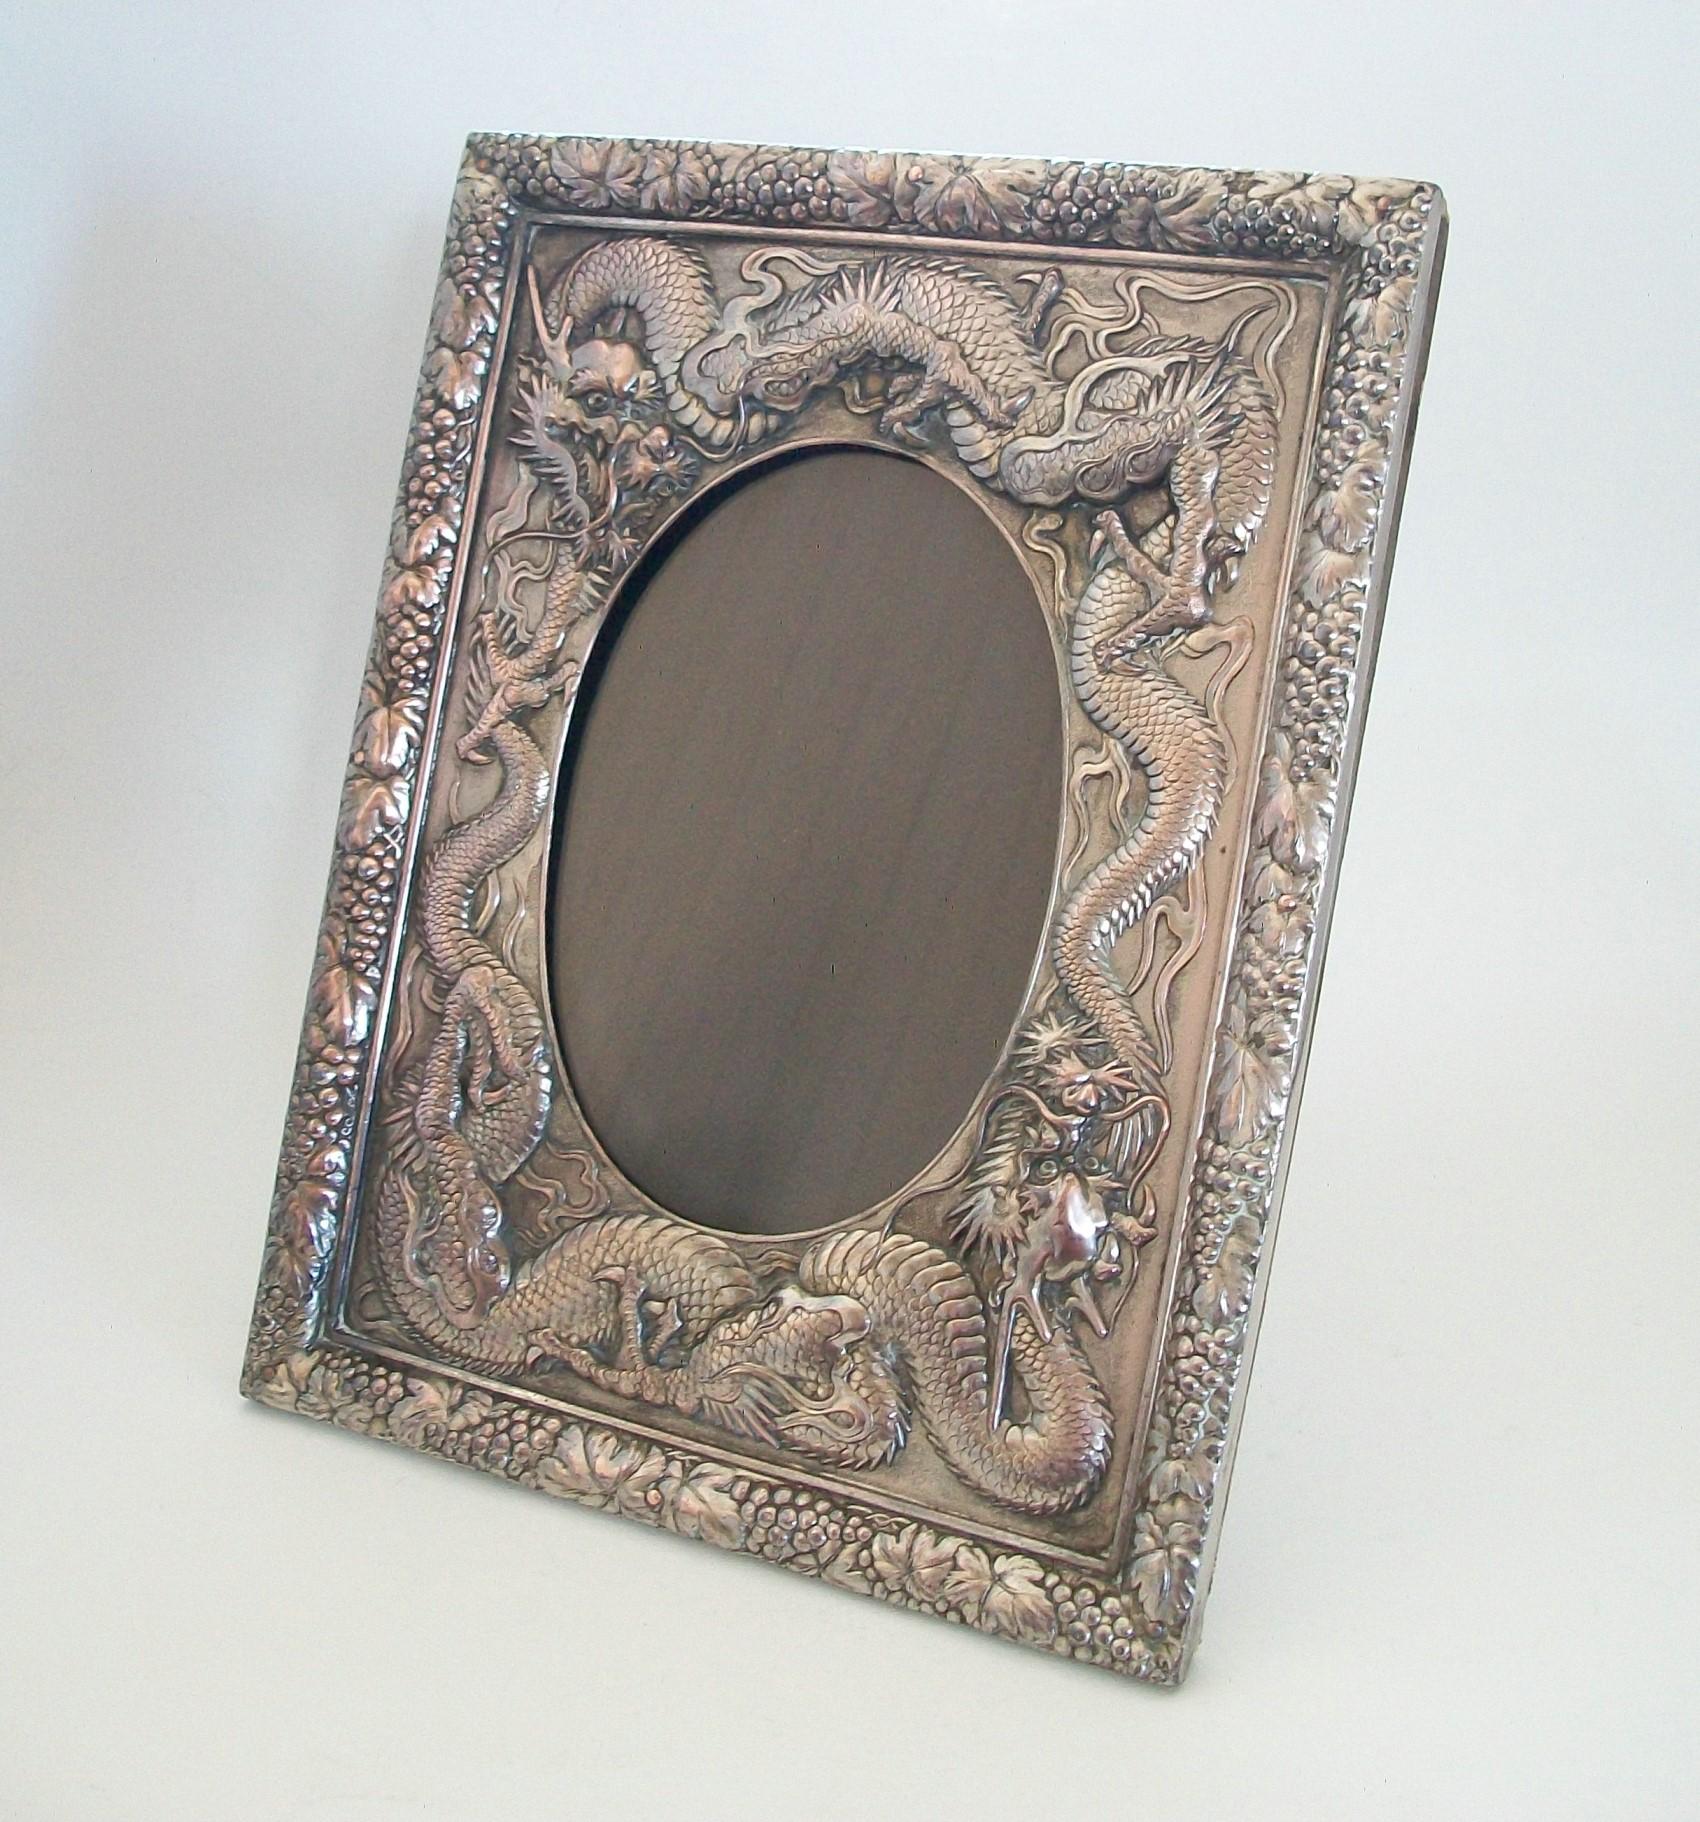 Hand-Crafted Antique Chinese Export Silver Repoussé Photo Frame, Early 20th Century